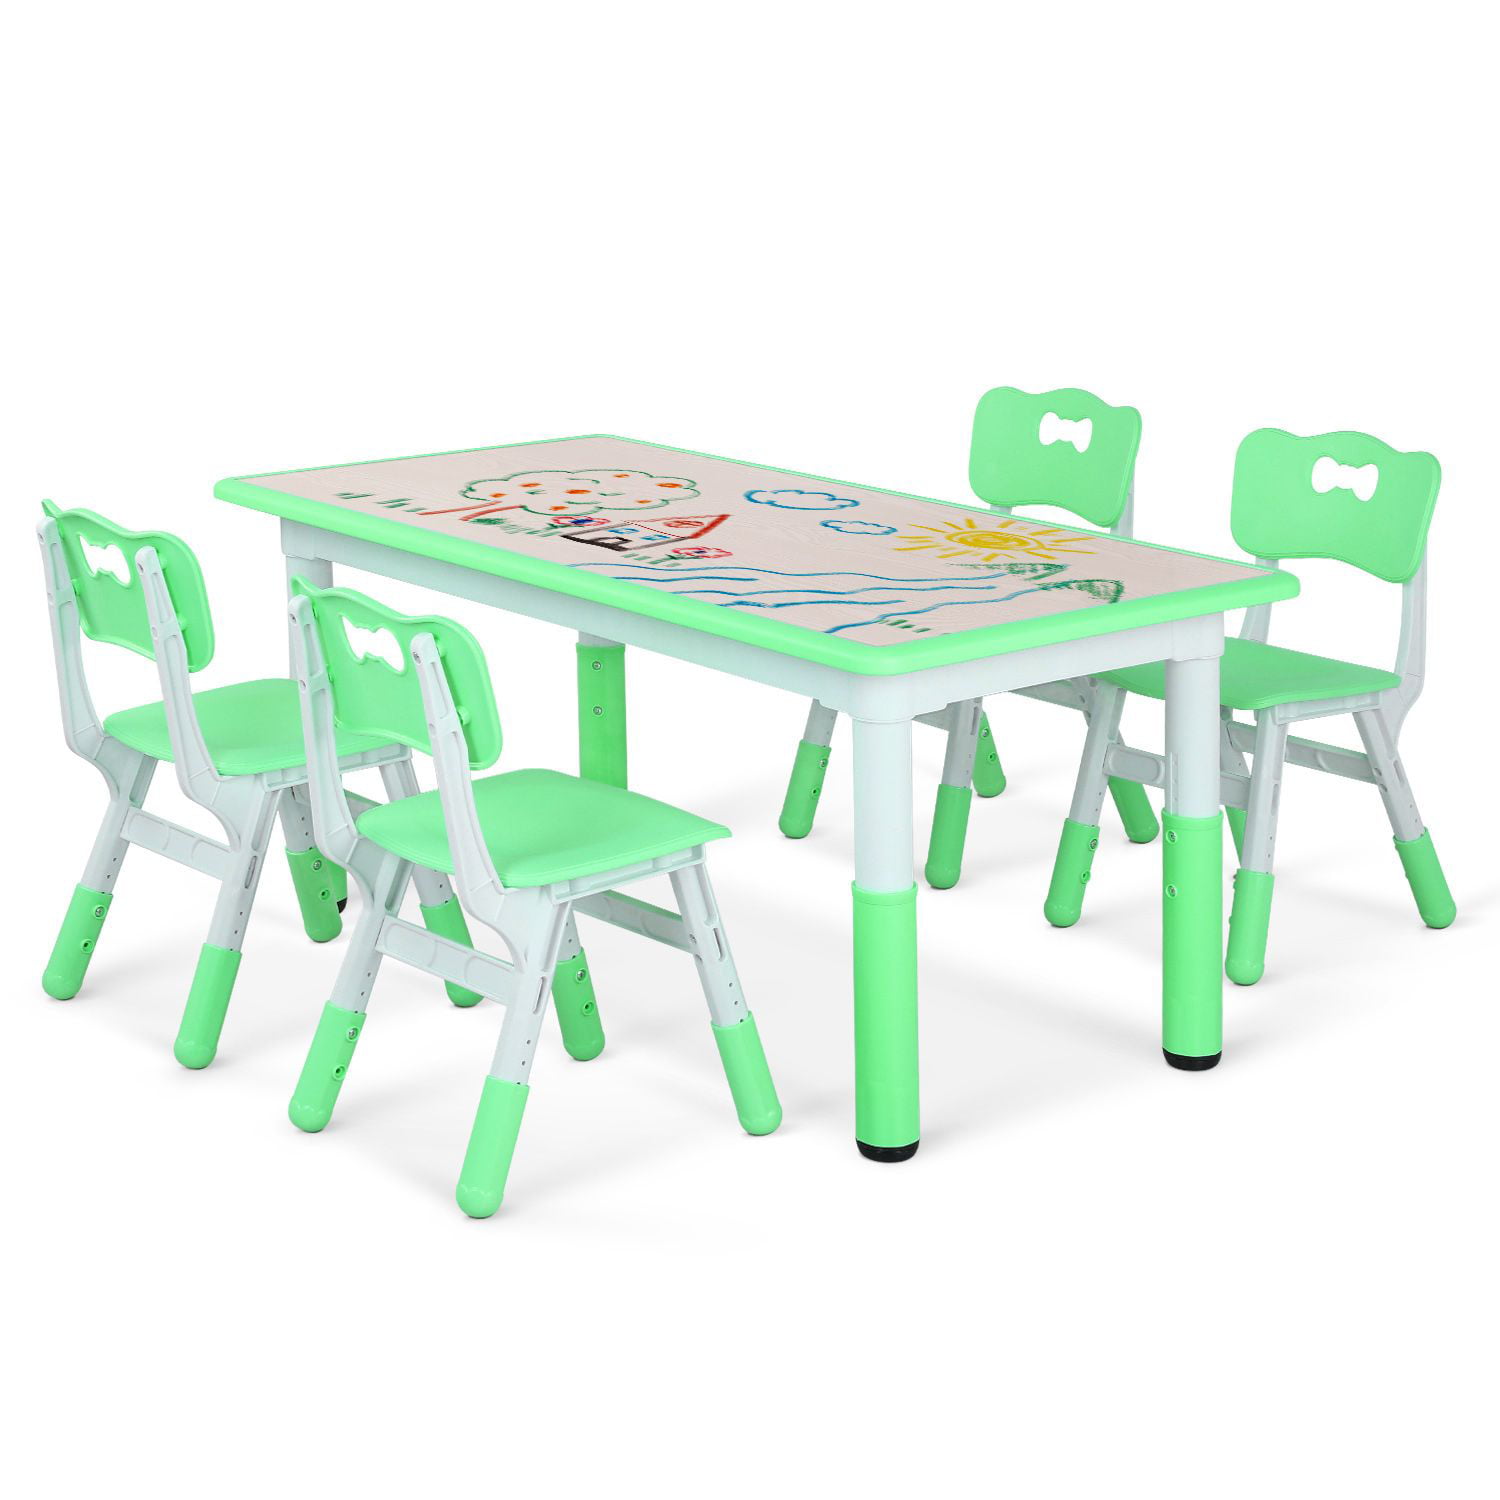 Kids Adjustable Activity Table And Chairs Set 5 Piece Green Daycare Preschool 